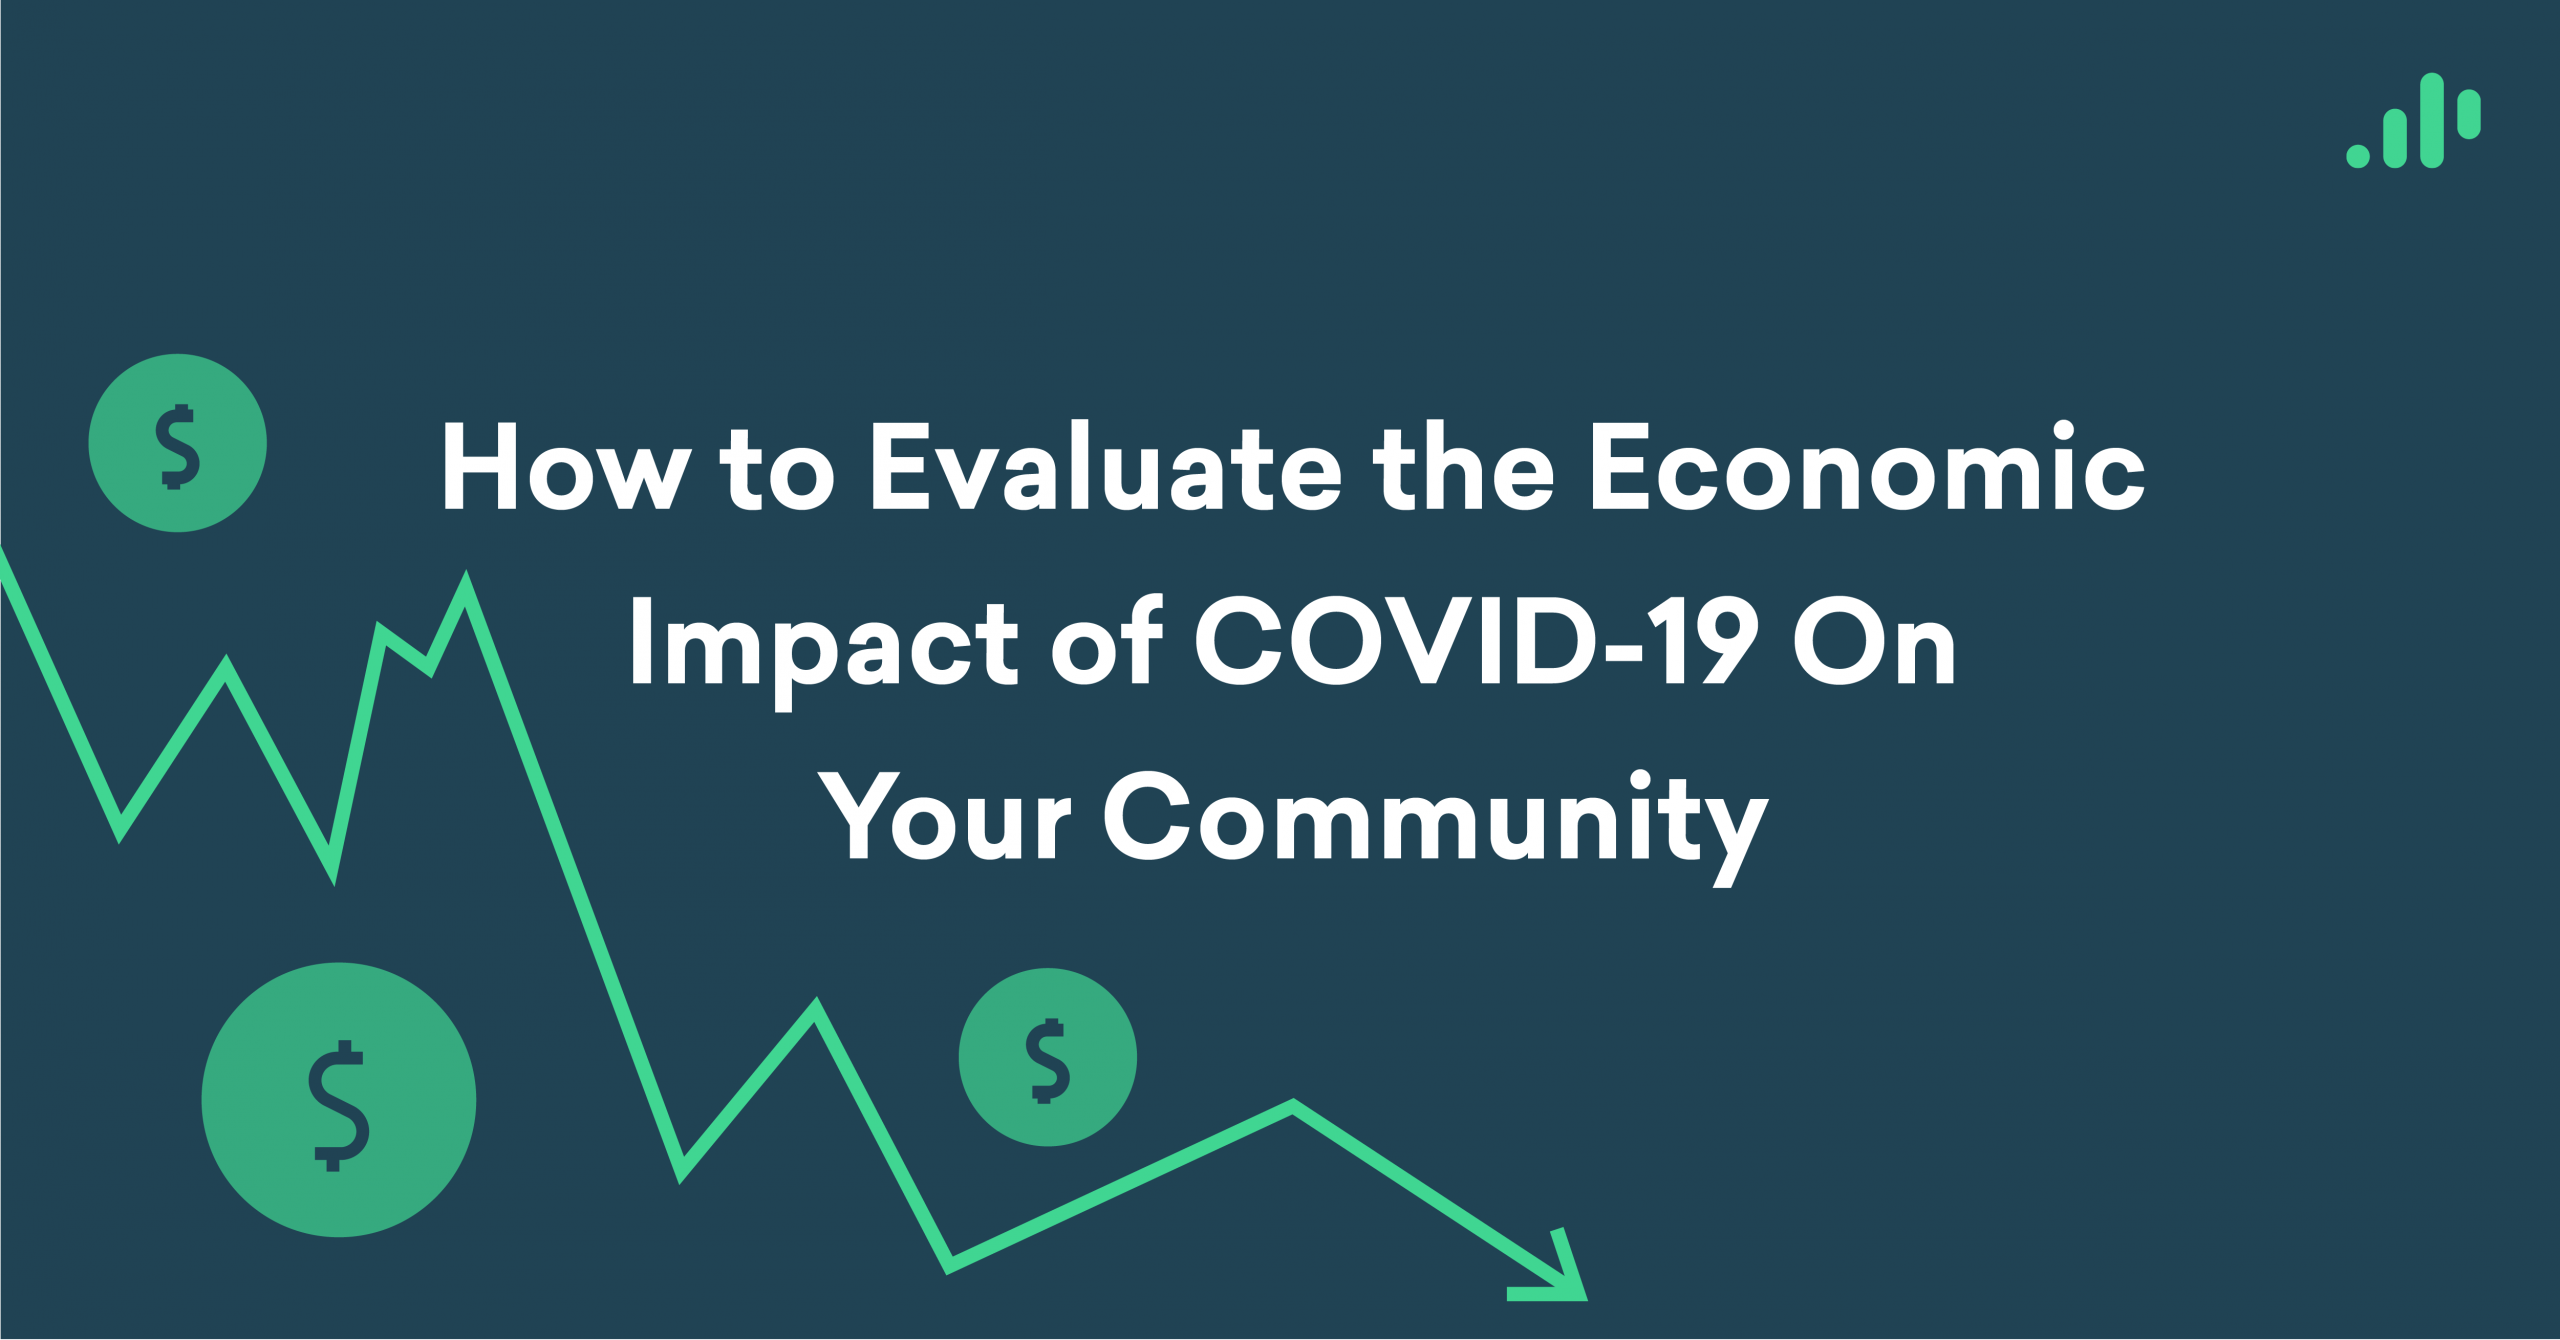 The Economic Impact of COVID-19 On Your Community